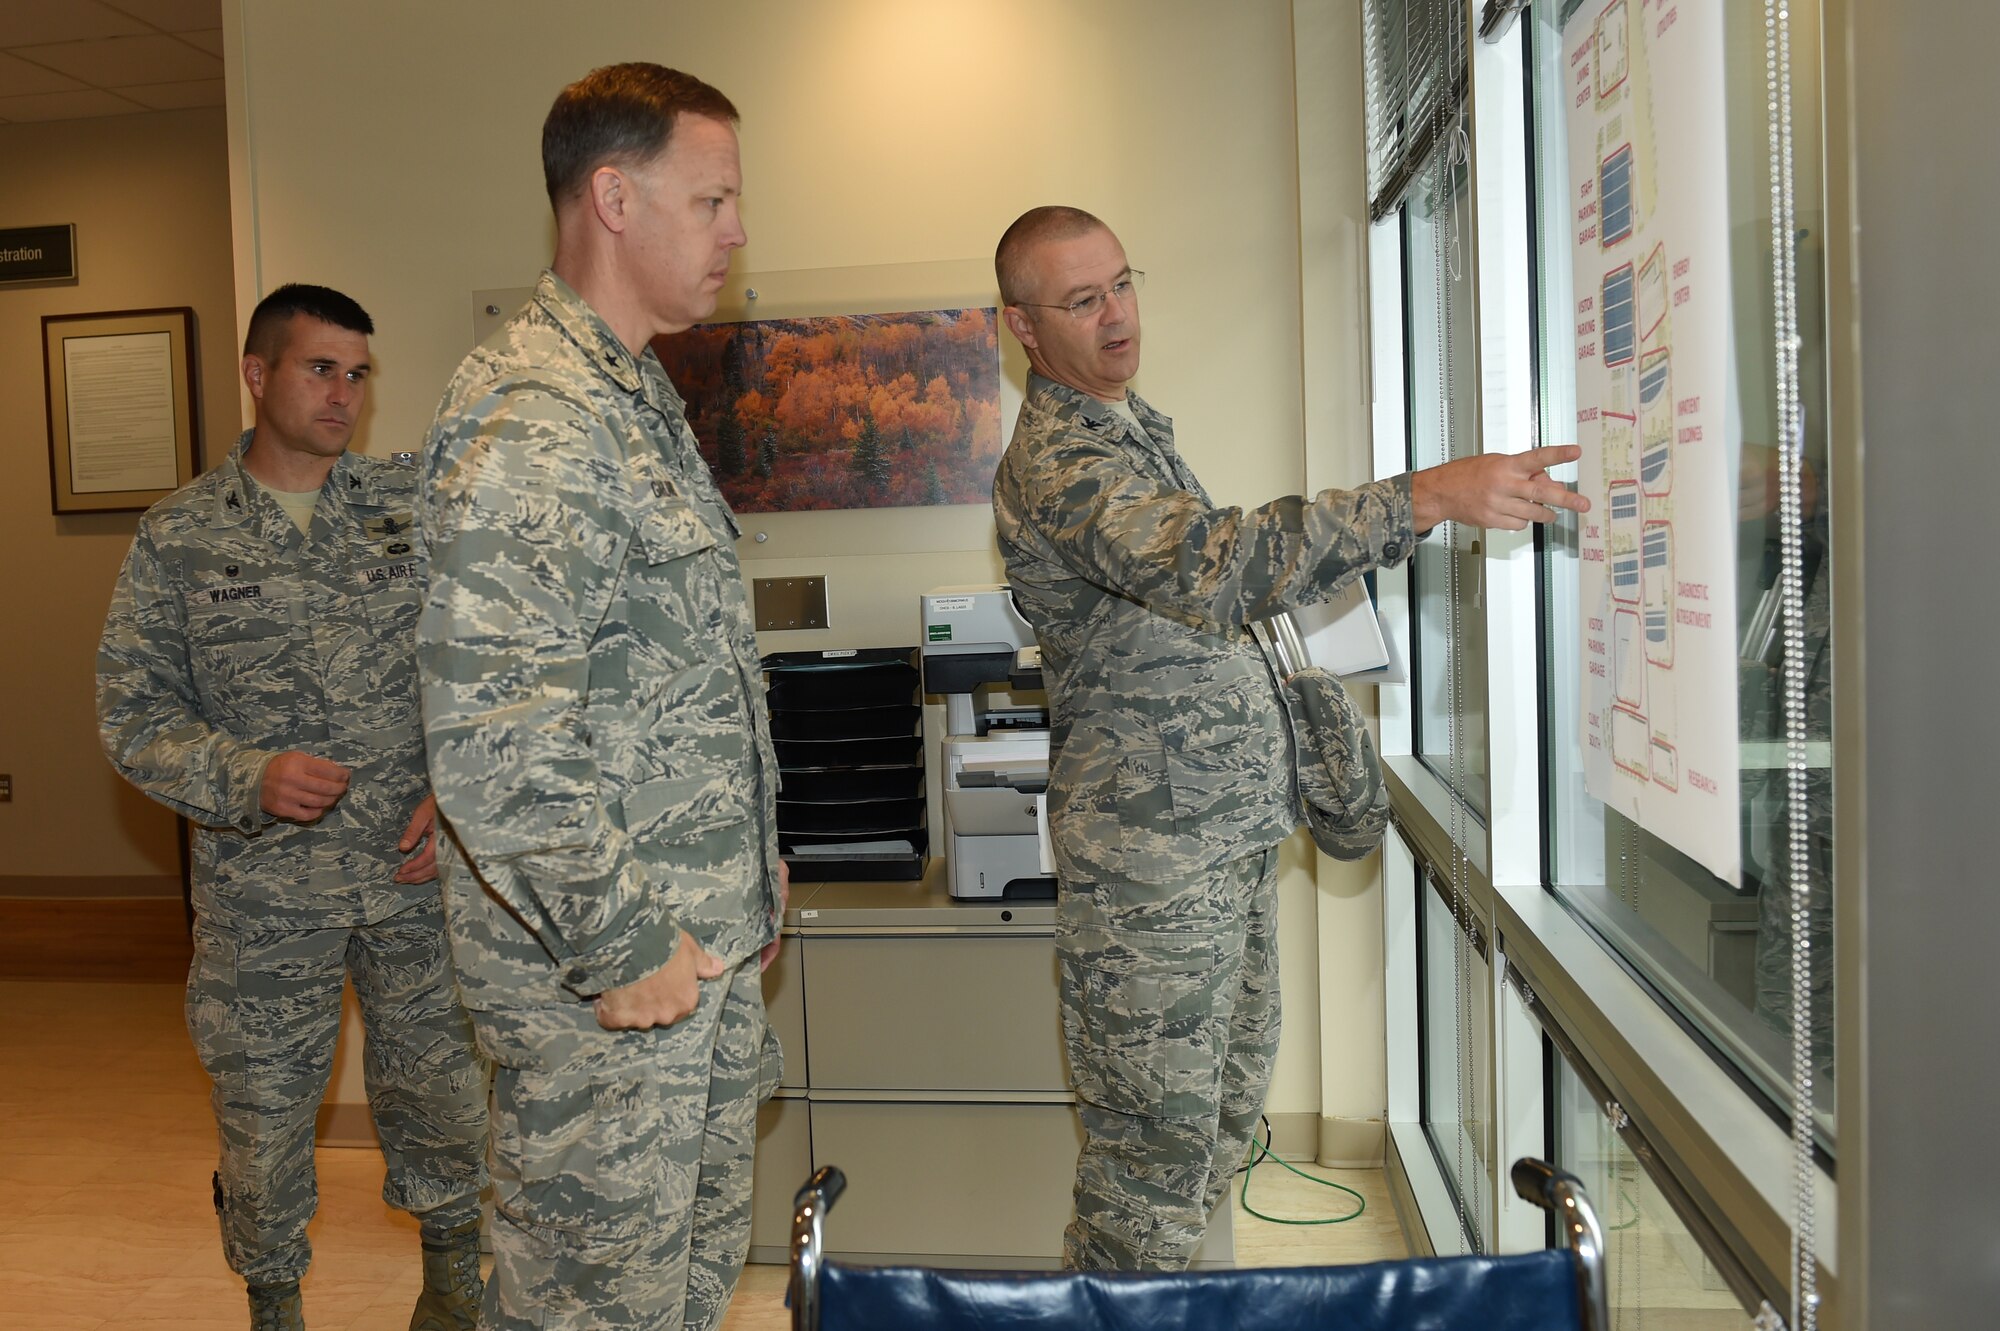 Col. Michael Kindt, 460th Medical Group commander, right, shows Brig. Gen. Steven Garland, 14th Air Force vice commander, left, the future plans for the Veterans Affairs Joint Venture Buckley Clinic Sept. 22, 2014, in Aurora, Colo. Buckley Air Force Base is Garland’s first stop on a tour of Air Force Space Command bases after becoming vice commander of the 14th AF in July 2014. (U.S. Air Force photo by Airman 1st Class Samantha Saulsbury/Released)